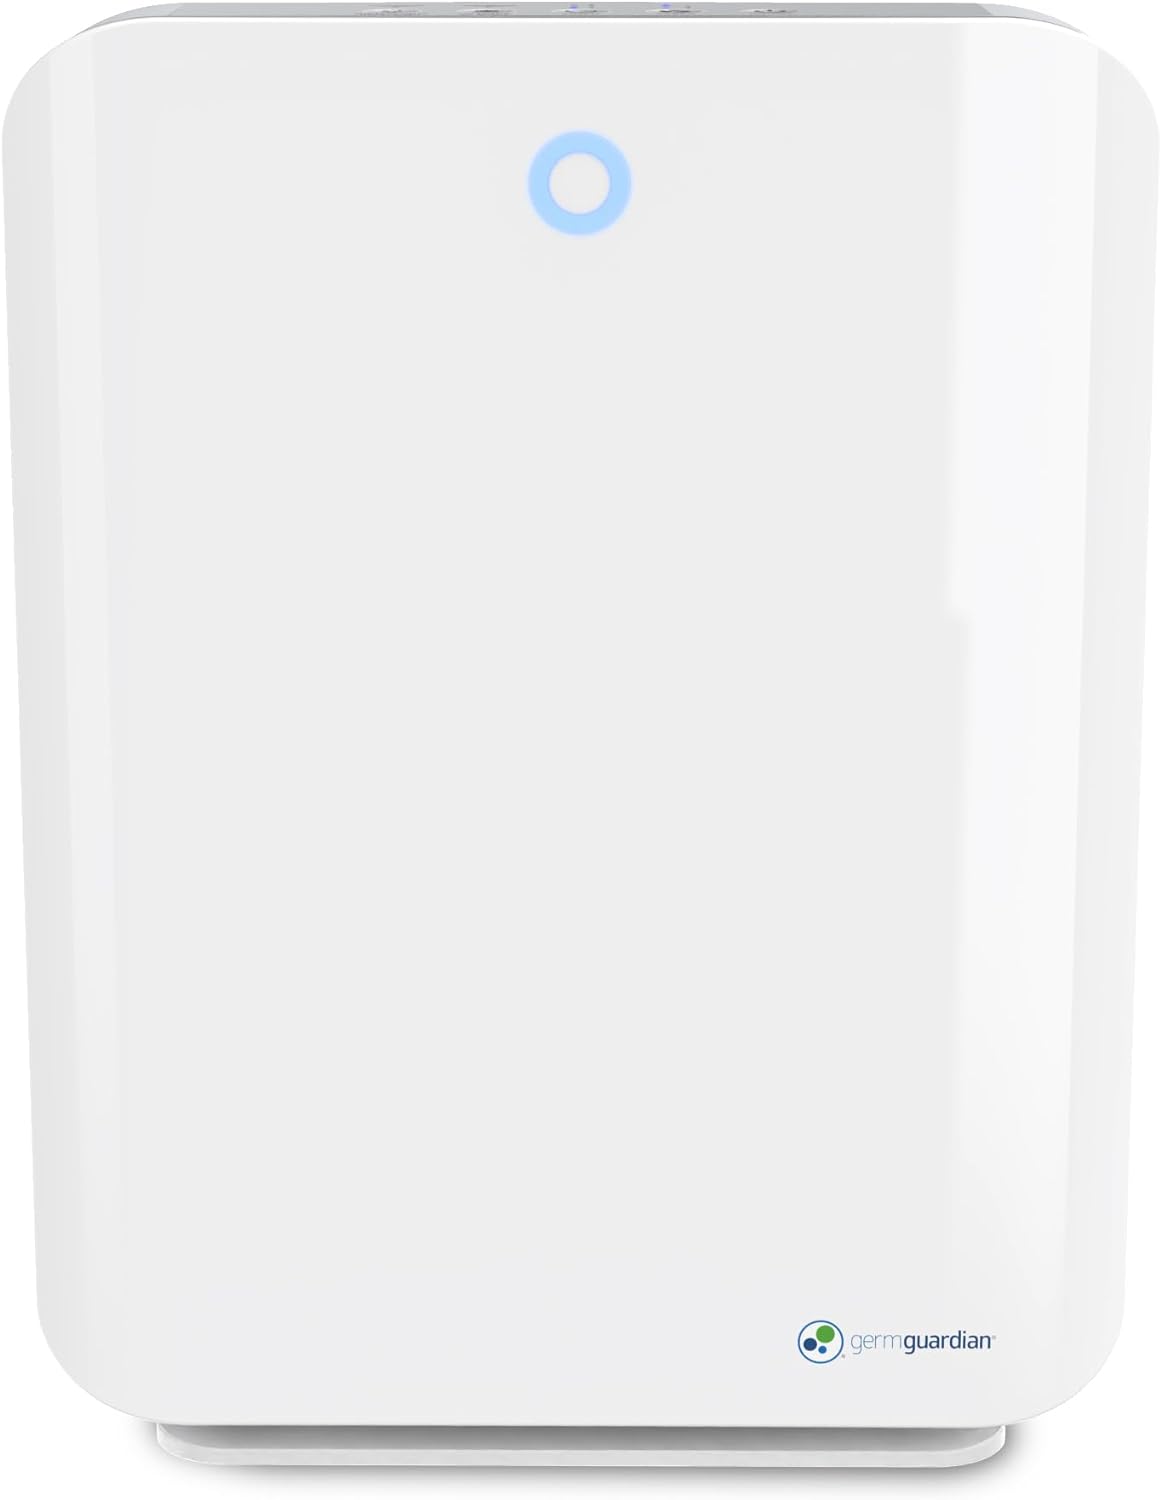 GermGuardian Air Purifier with HEPA 13 Filter, Removes 99.97% of Pollutants, Large Room up to 1760 Sq. Foot Room in 1 Hr, UV-C Light Helps Reduce Germs, Zero Ozone Verified, 21", White, AC5900WCA